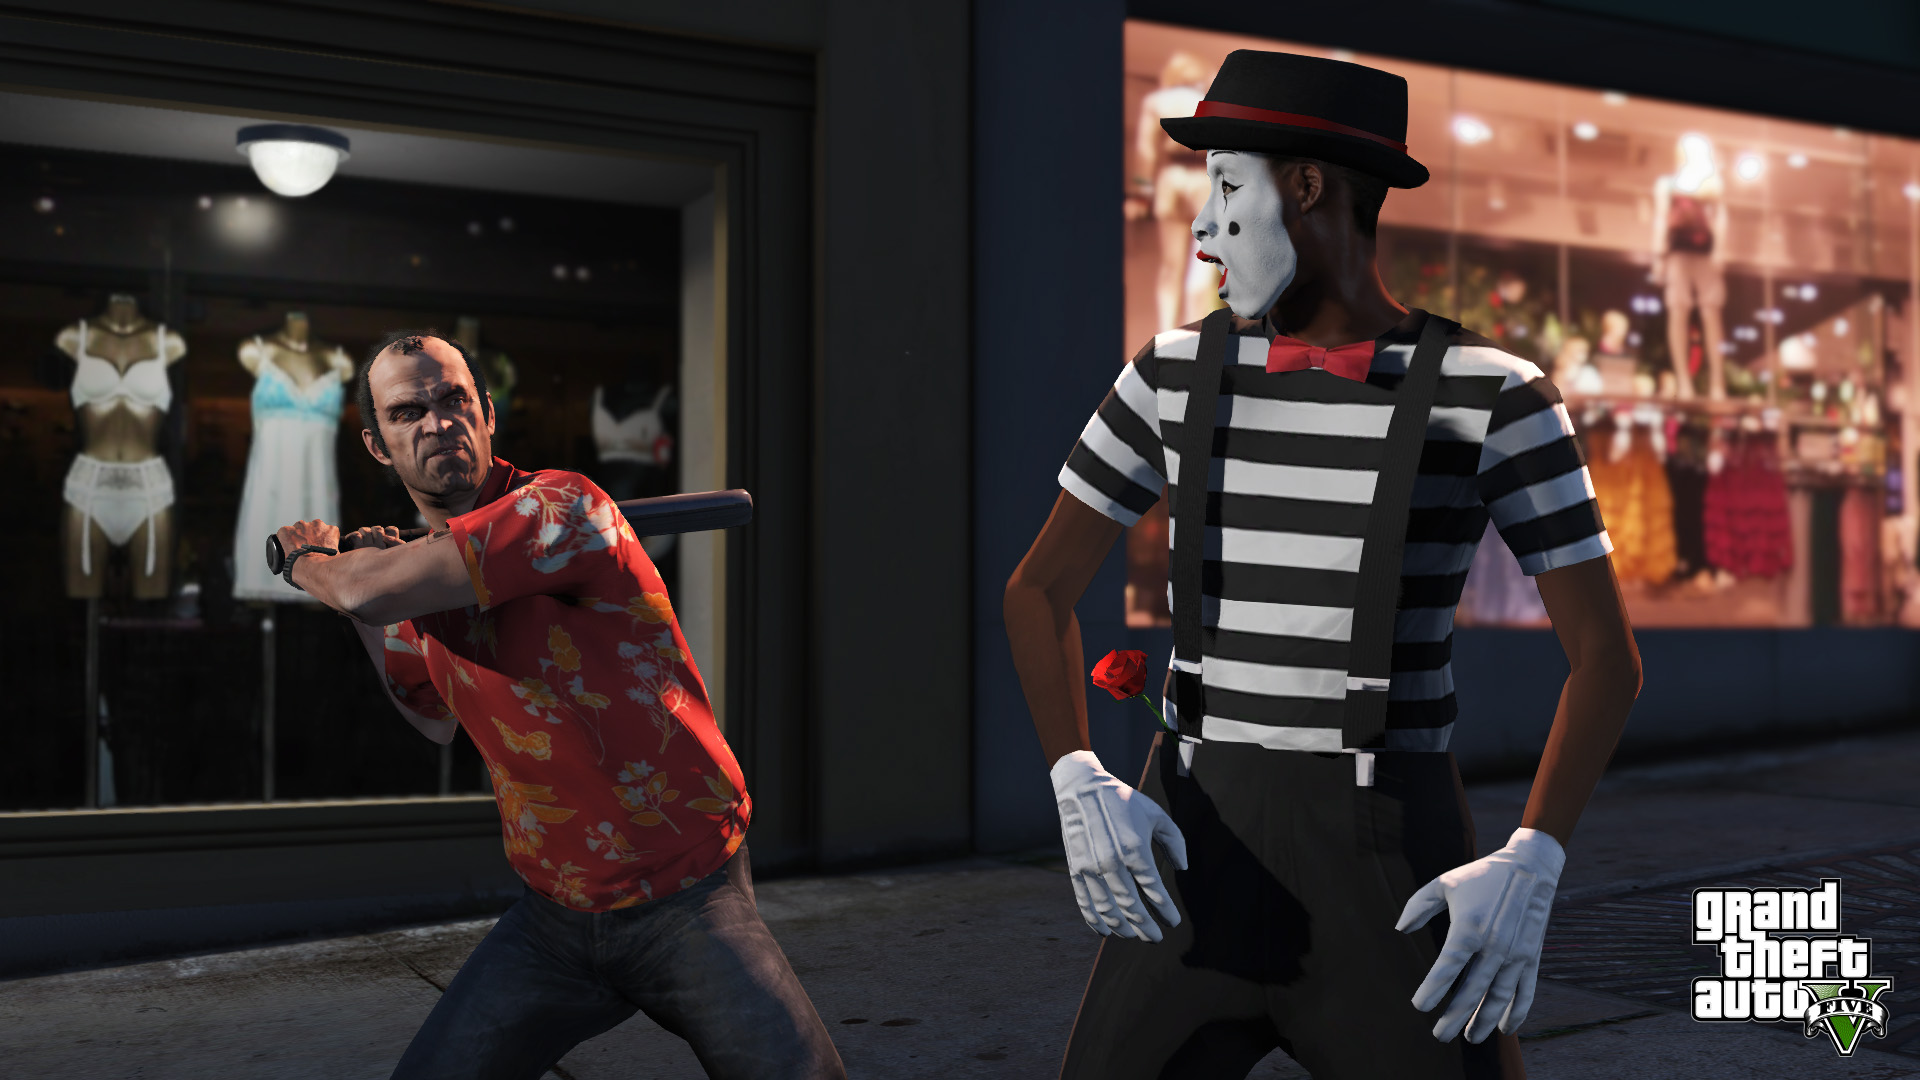 Free download wallpaper Video Game, Grand Theft Auto, Grand Theft Auto V, Trevor Philips, Mime on your PC desktop